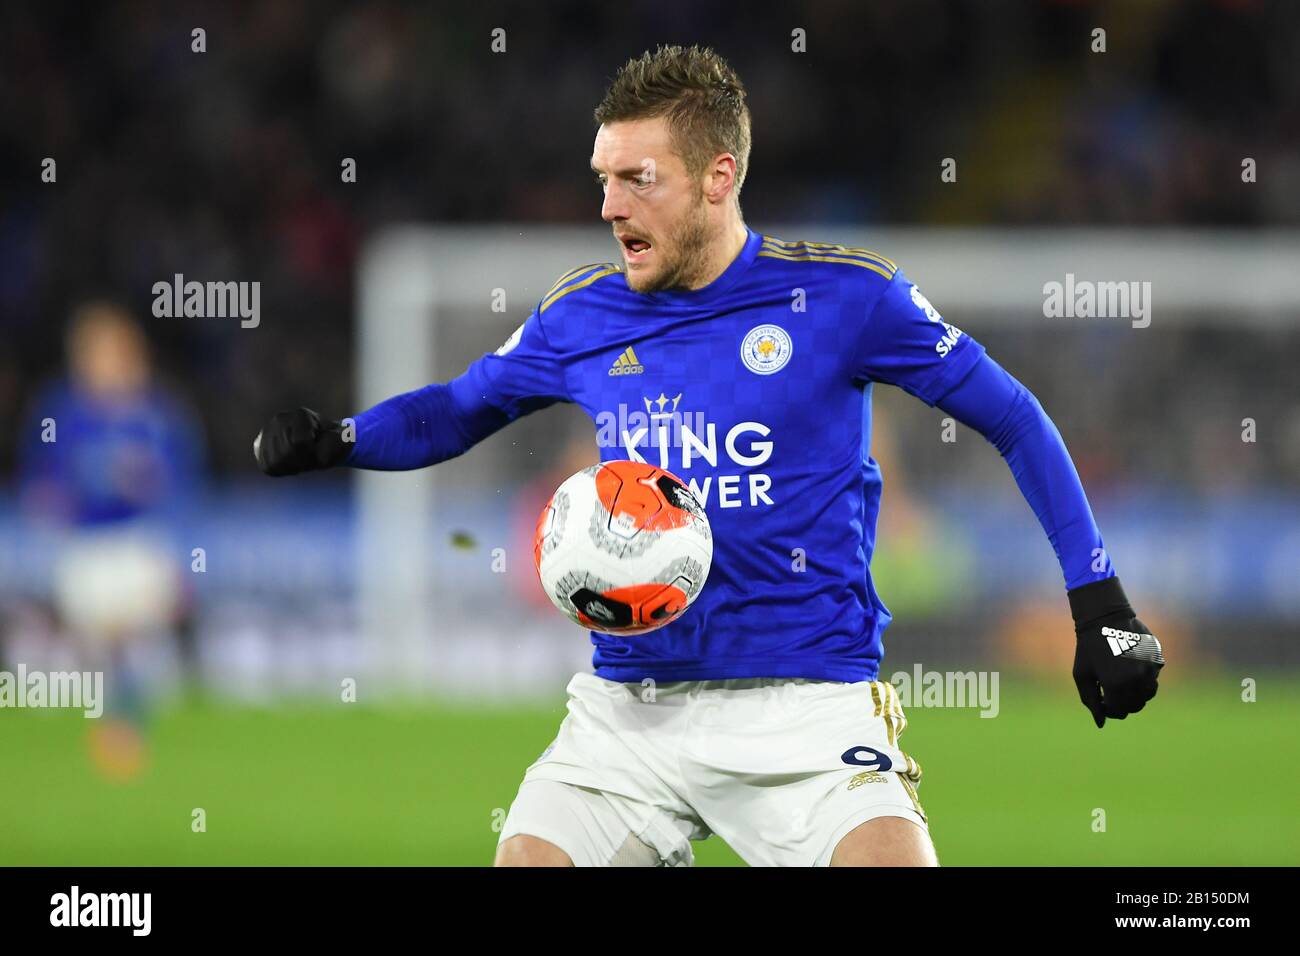 LEICESTER, ENGLAND - FEBRUARY 22ND Jamie Vardy (9) of Leicester City during the Premier League match between Leicester City and Manchester City at the King Power Stadium, Leicester on Saturday 22nd February 2020. (Credit: Jon Hobley | MI News) Photograph may only be used for newspaper and/or magazine editorial purposes, license required for commercial use Credit: MI News & Sport /Alamy Live News Stock Photo